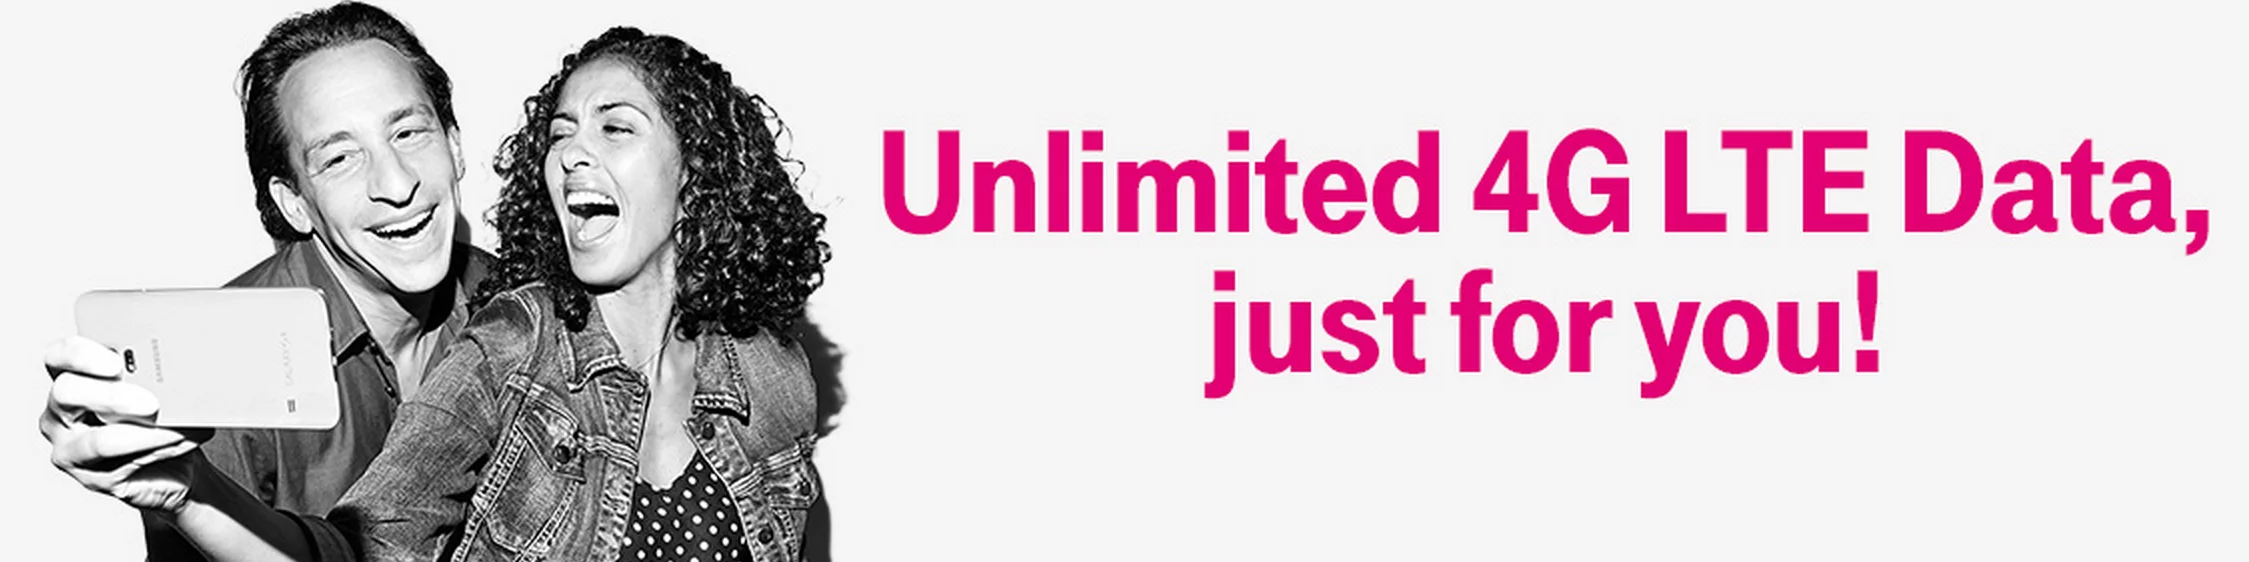 T Mobile unlimited data banner - for some reason we don't have an alt tag here